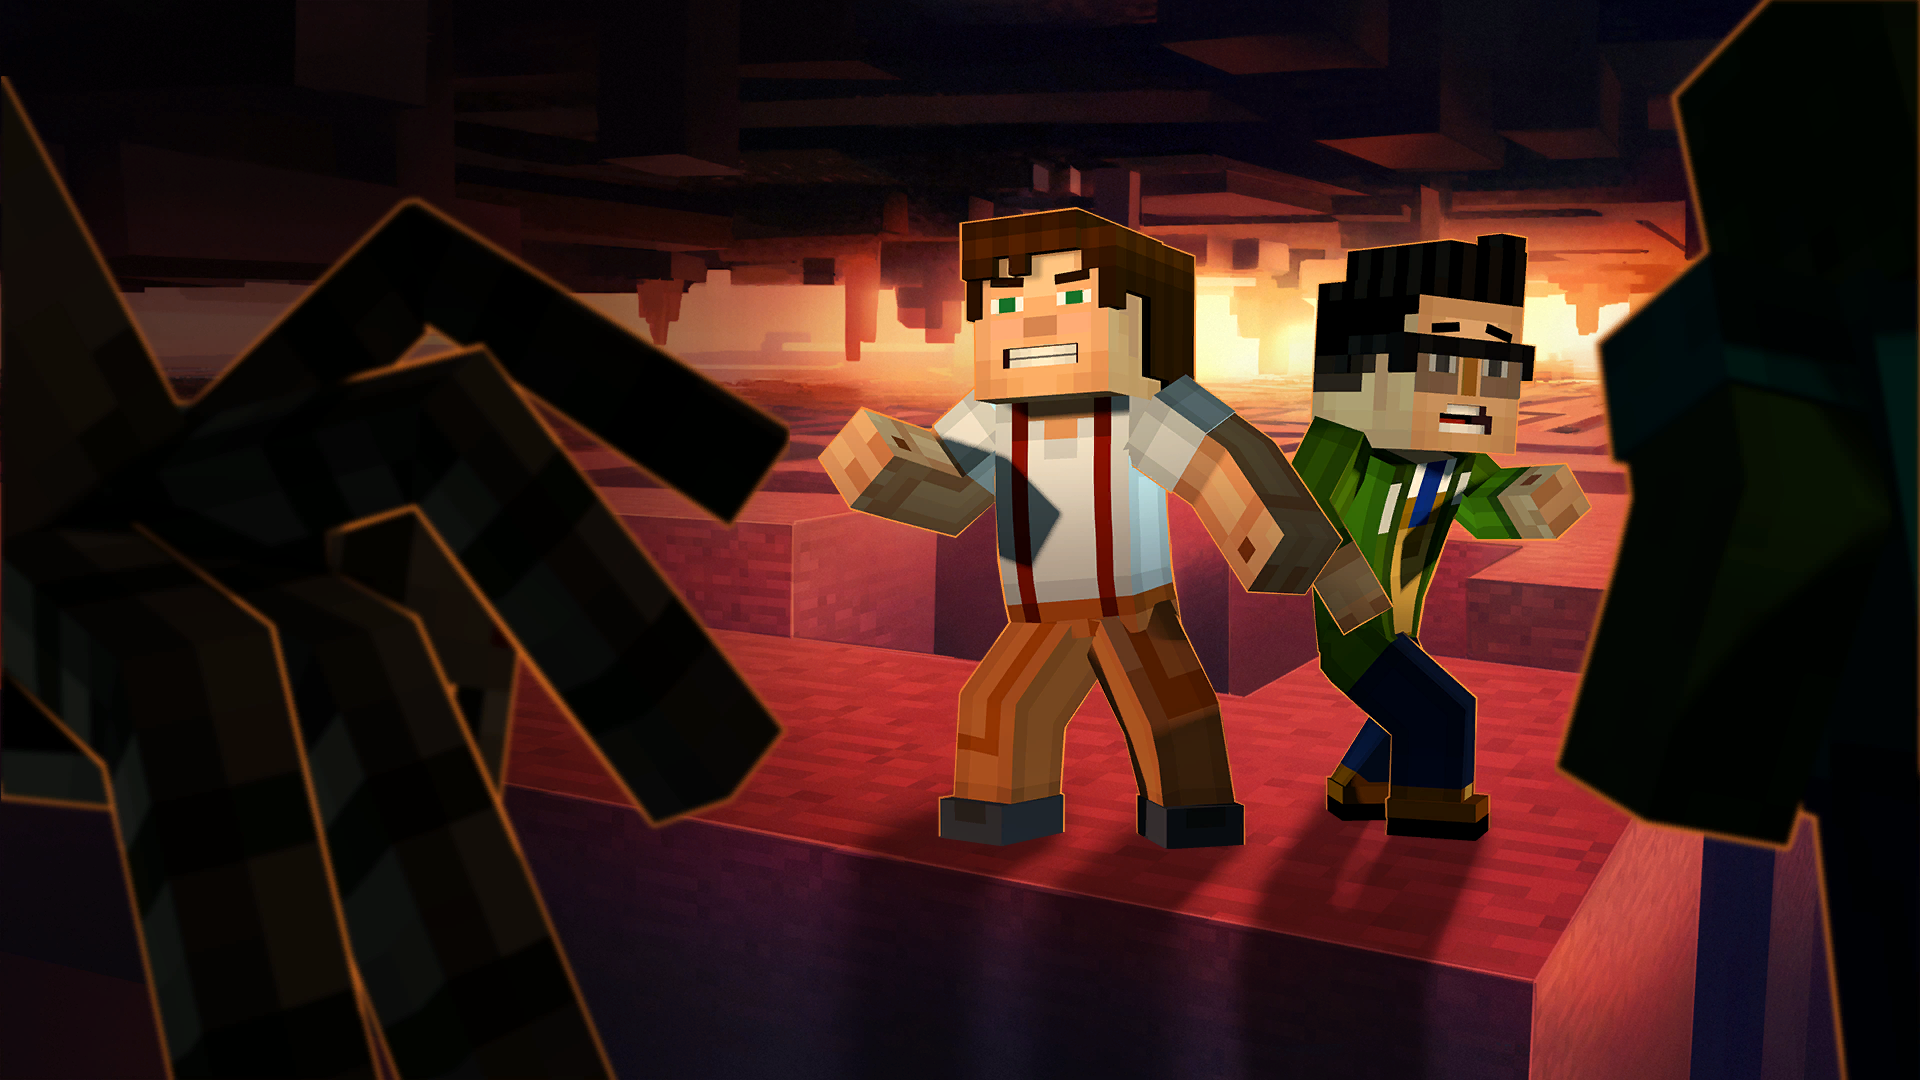 Minecraft: Story Mode Season Two (2017 Video Game) - Behind The Voice Actors